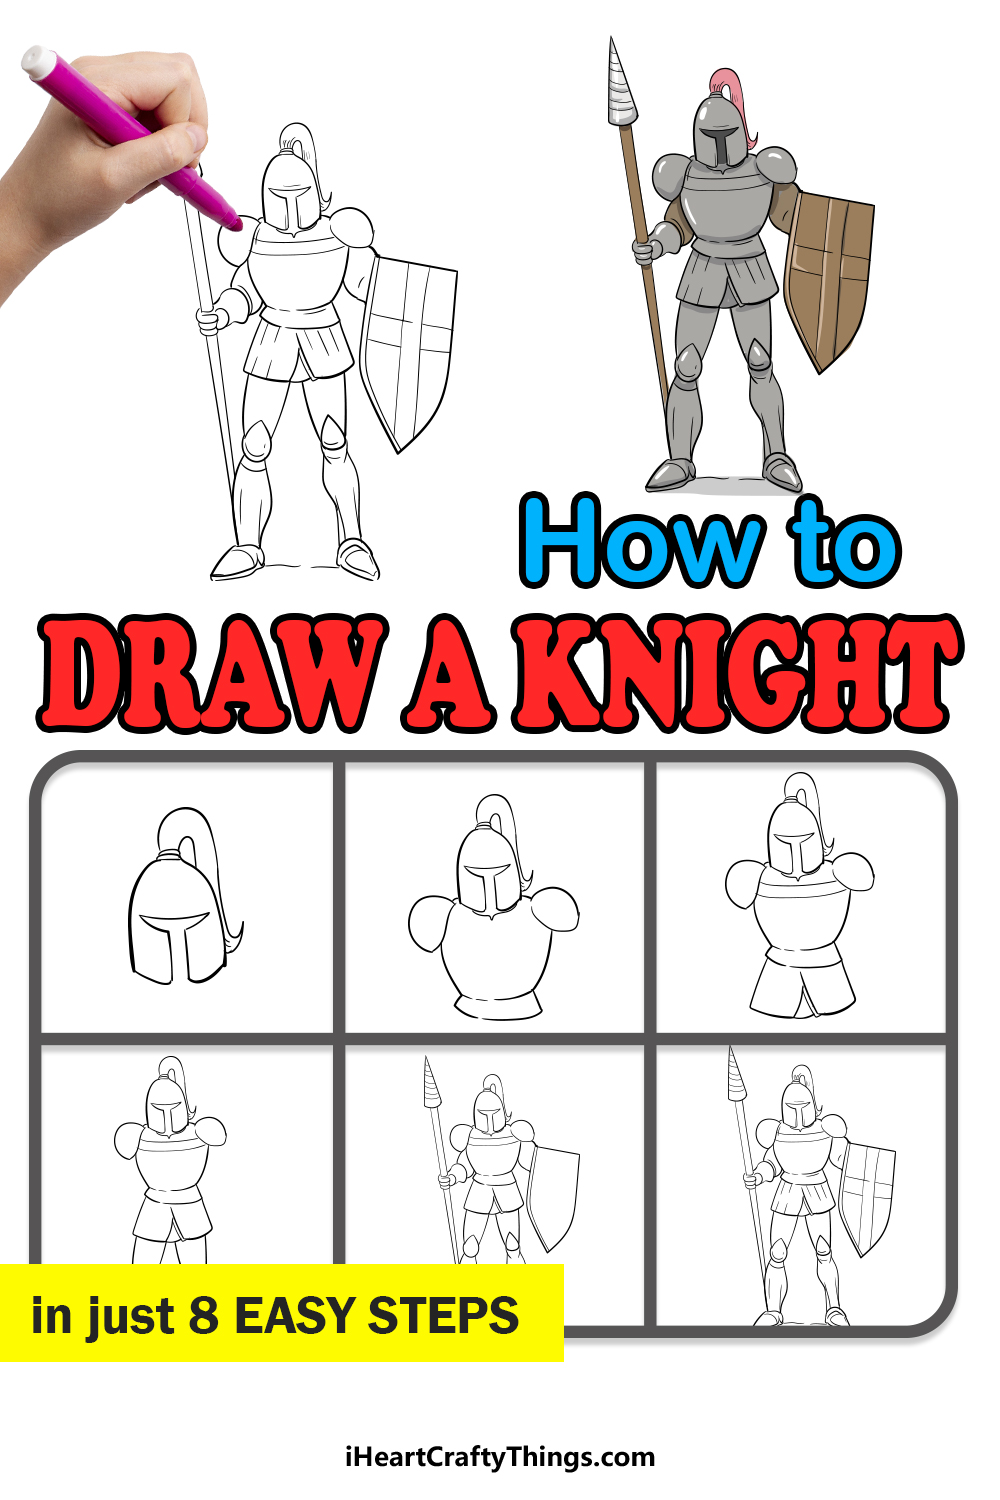 how to draw a knight in 8 easy steps